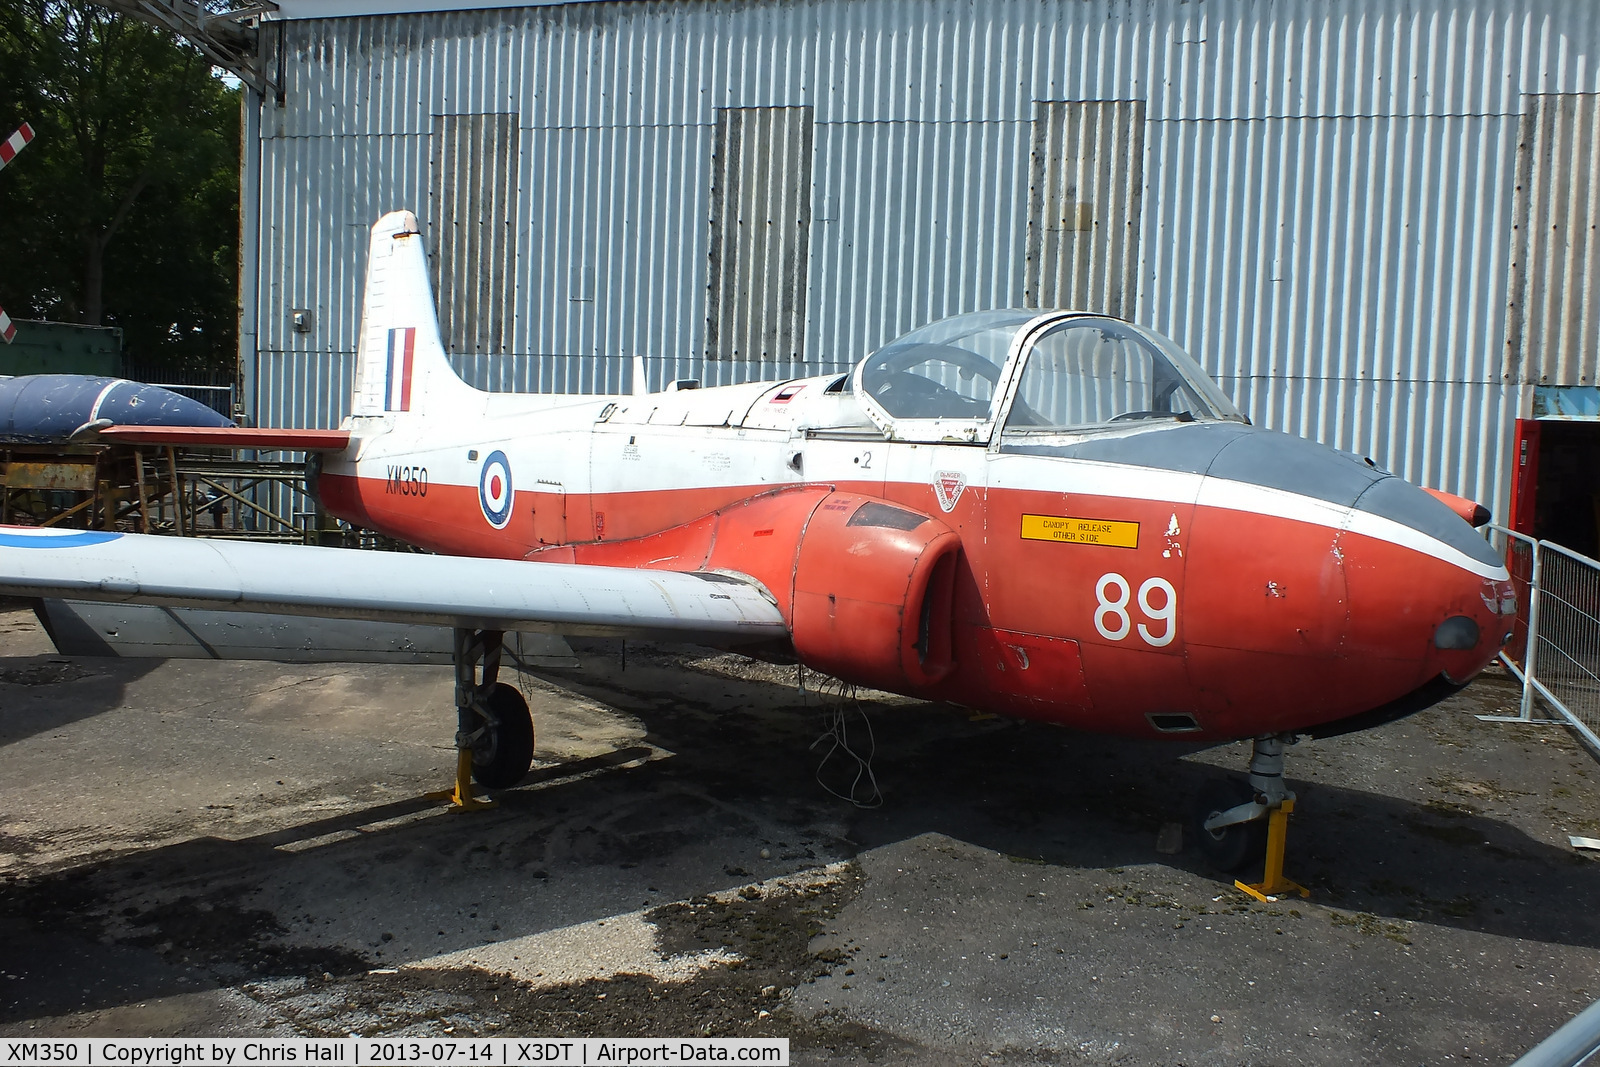 XM350, 1959 Hunting P-84 Jet Provost T.3A C/N PAC/W/6307, preserved at the South Yorkshire Aircraft Museum, AeroVenture, Doncaster